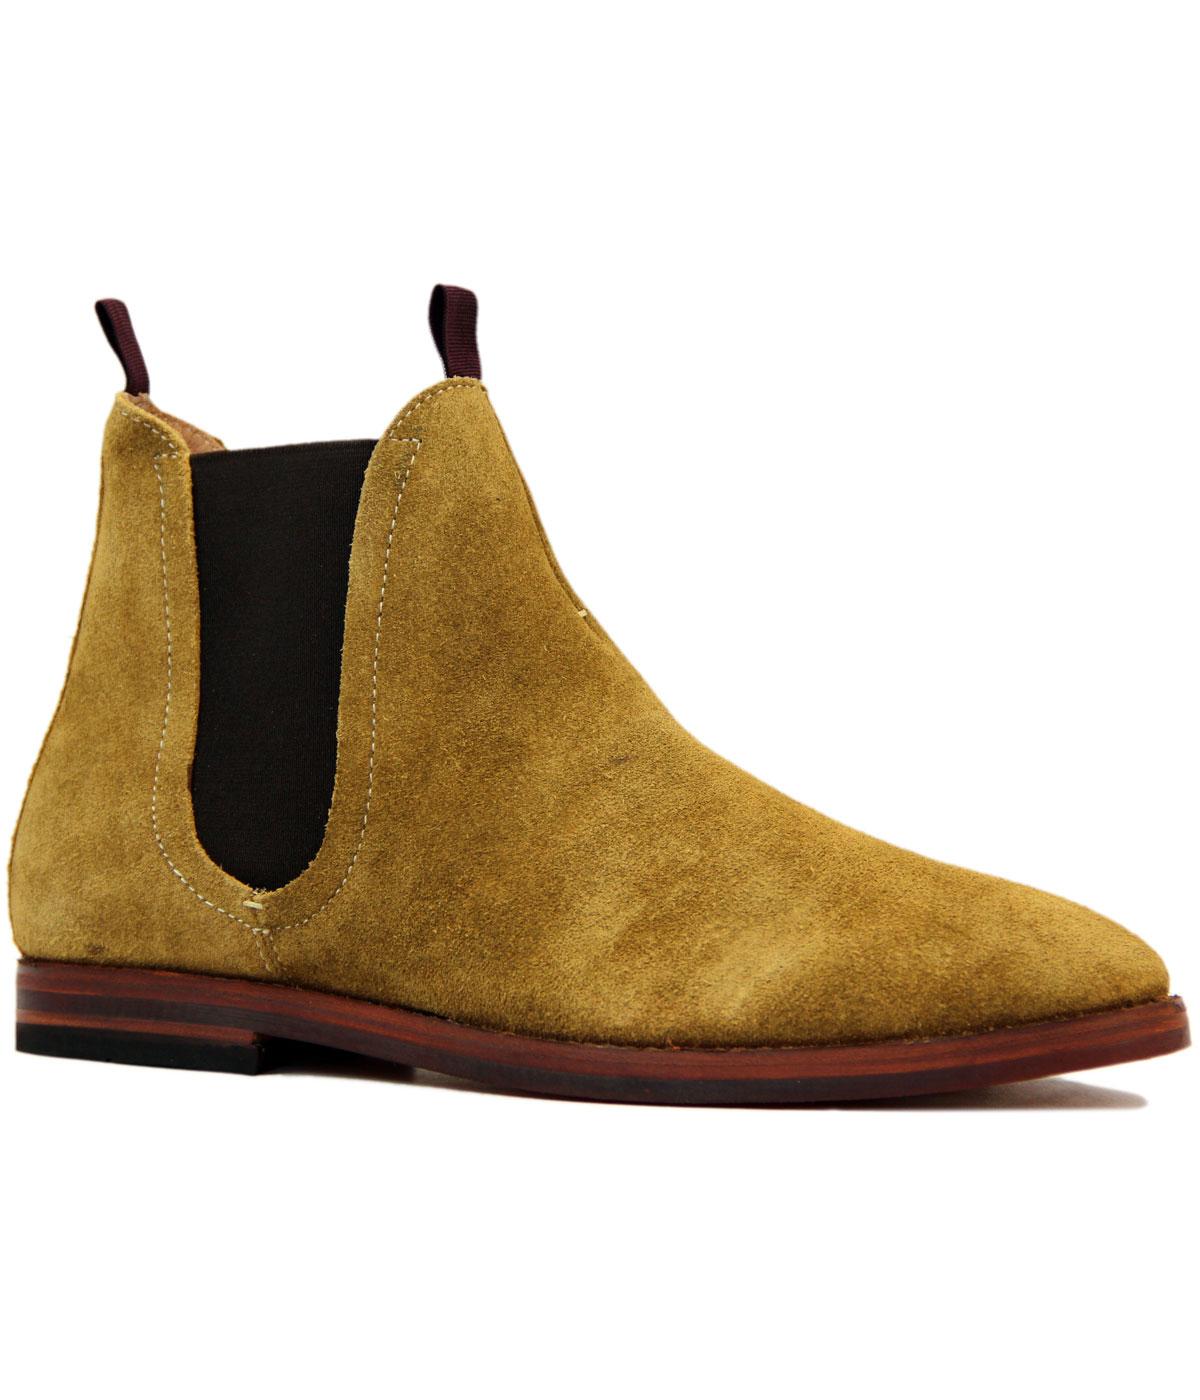 H BY HUDSON Tamper Retro Mod Suede Chelsea Boots in Sand